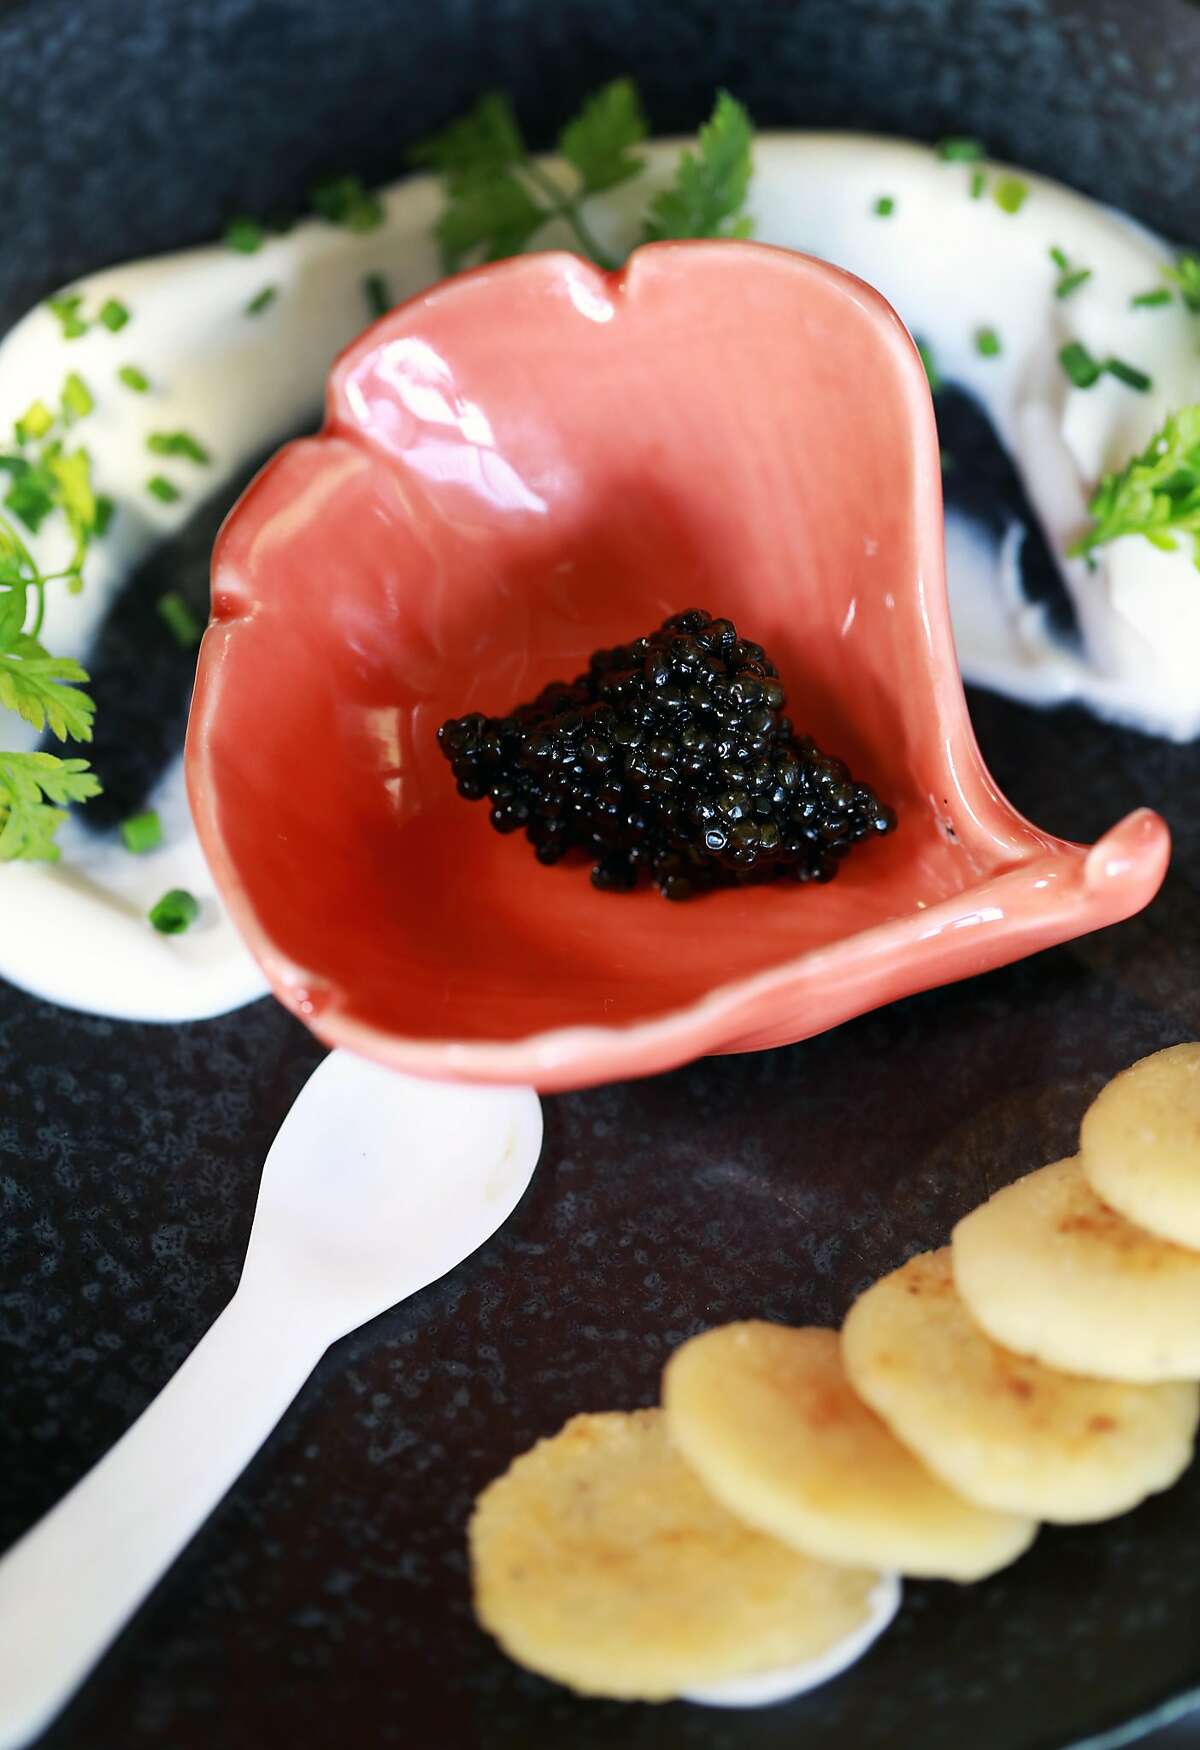 Caviar arepas at Ungrafted, a wine bar located at 2419 3rd St., in San Francisco, Calif., on Wednesday, April 10, 2019.